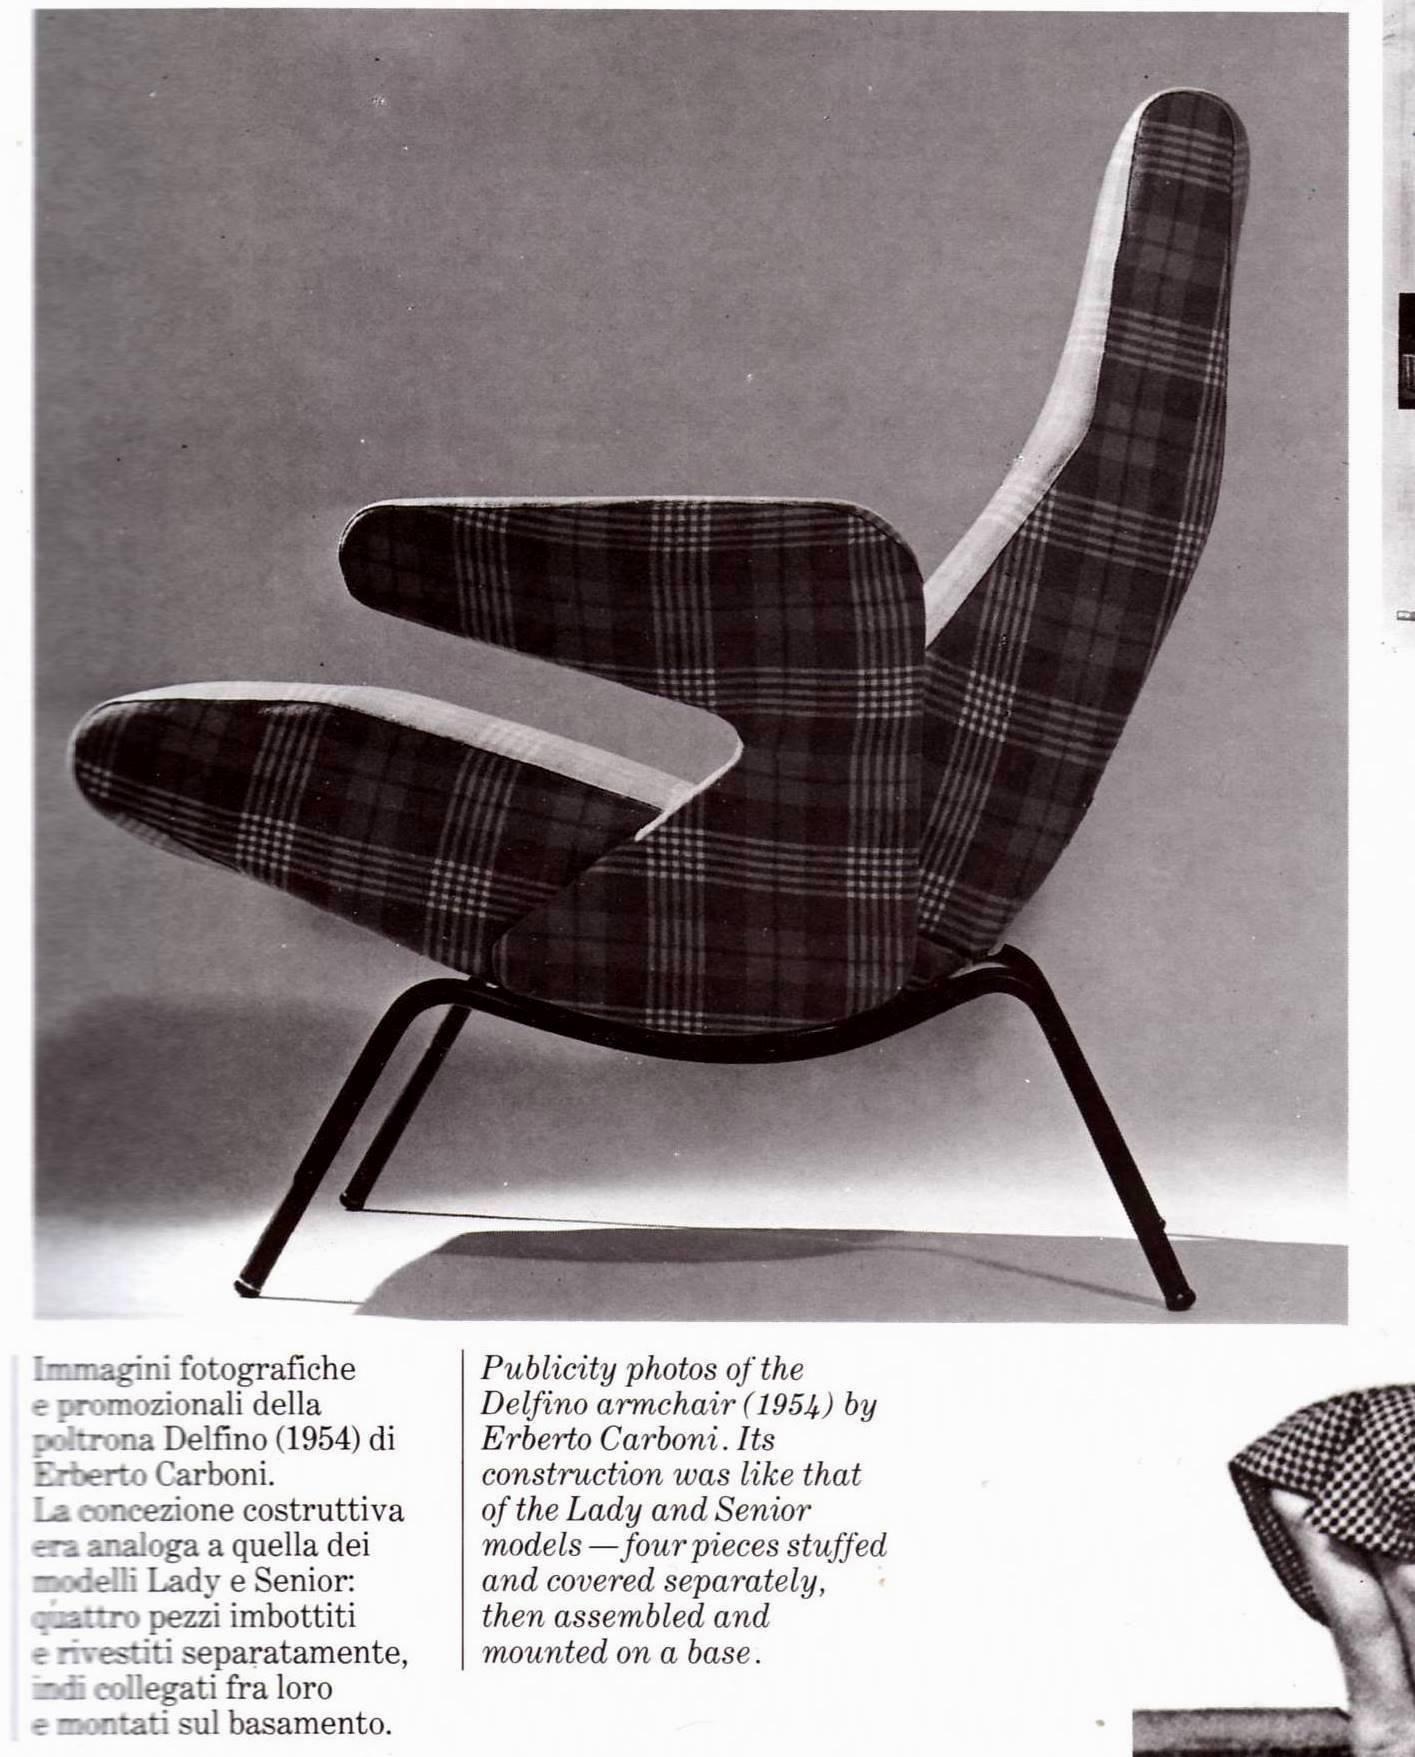 Brass 'Delfino' Lounge Chair & Ottoman by Carboni for Arflex, 1954, Very Early Examples